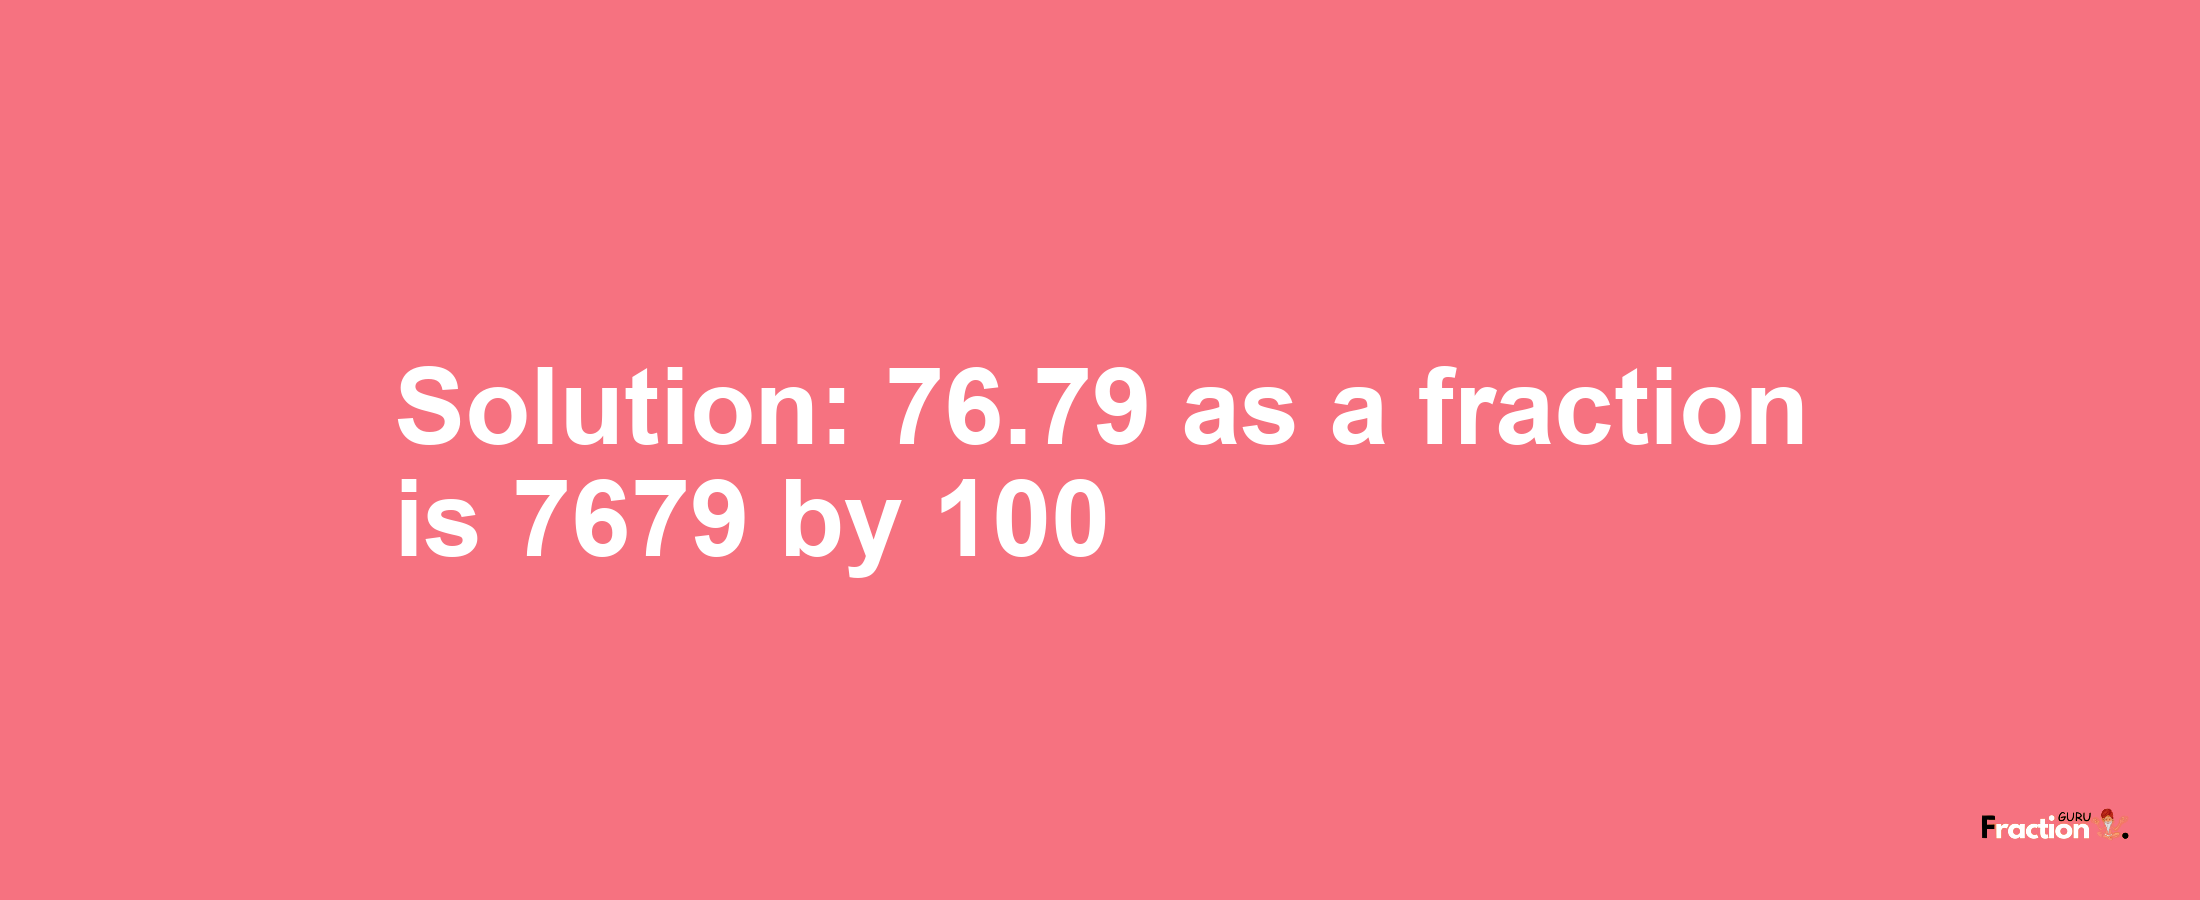 Solution:76.79 as a fraction is 7679/100